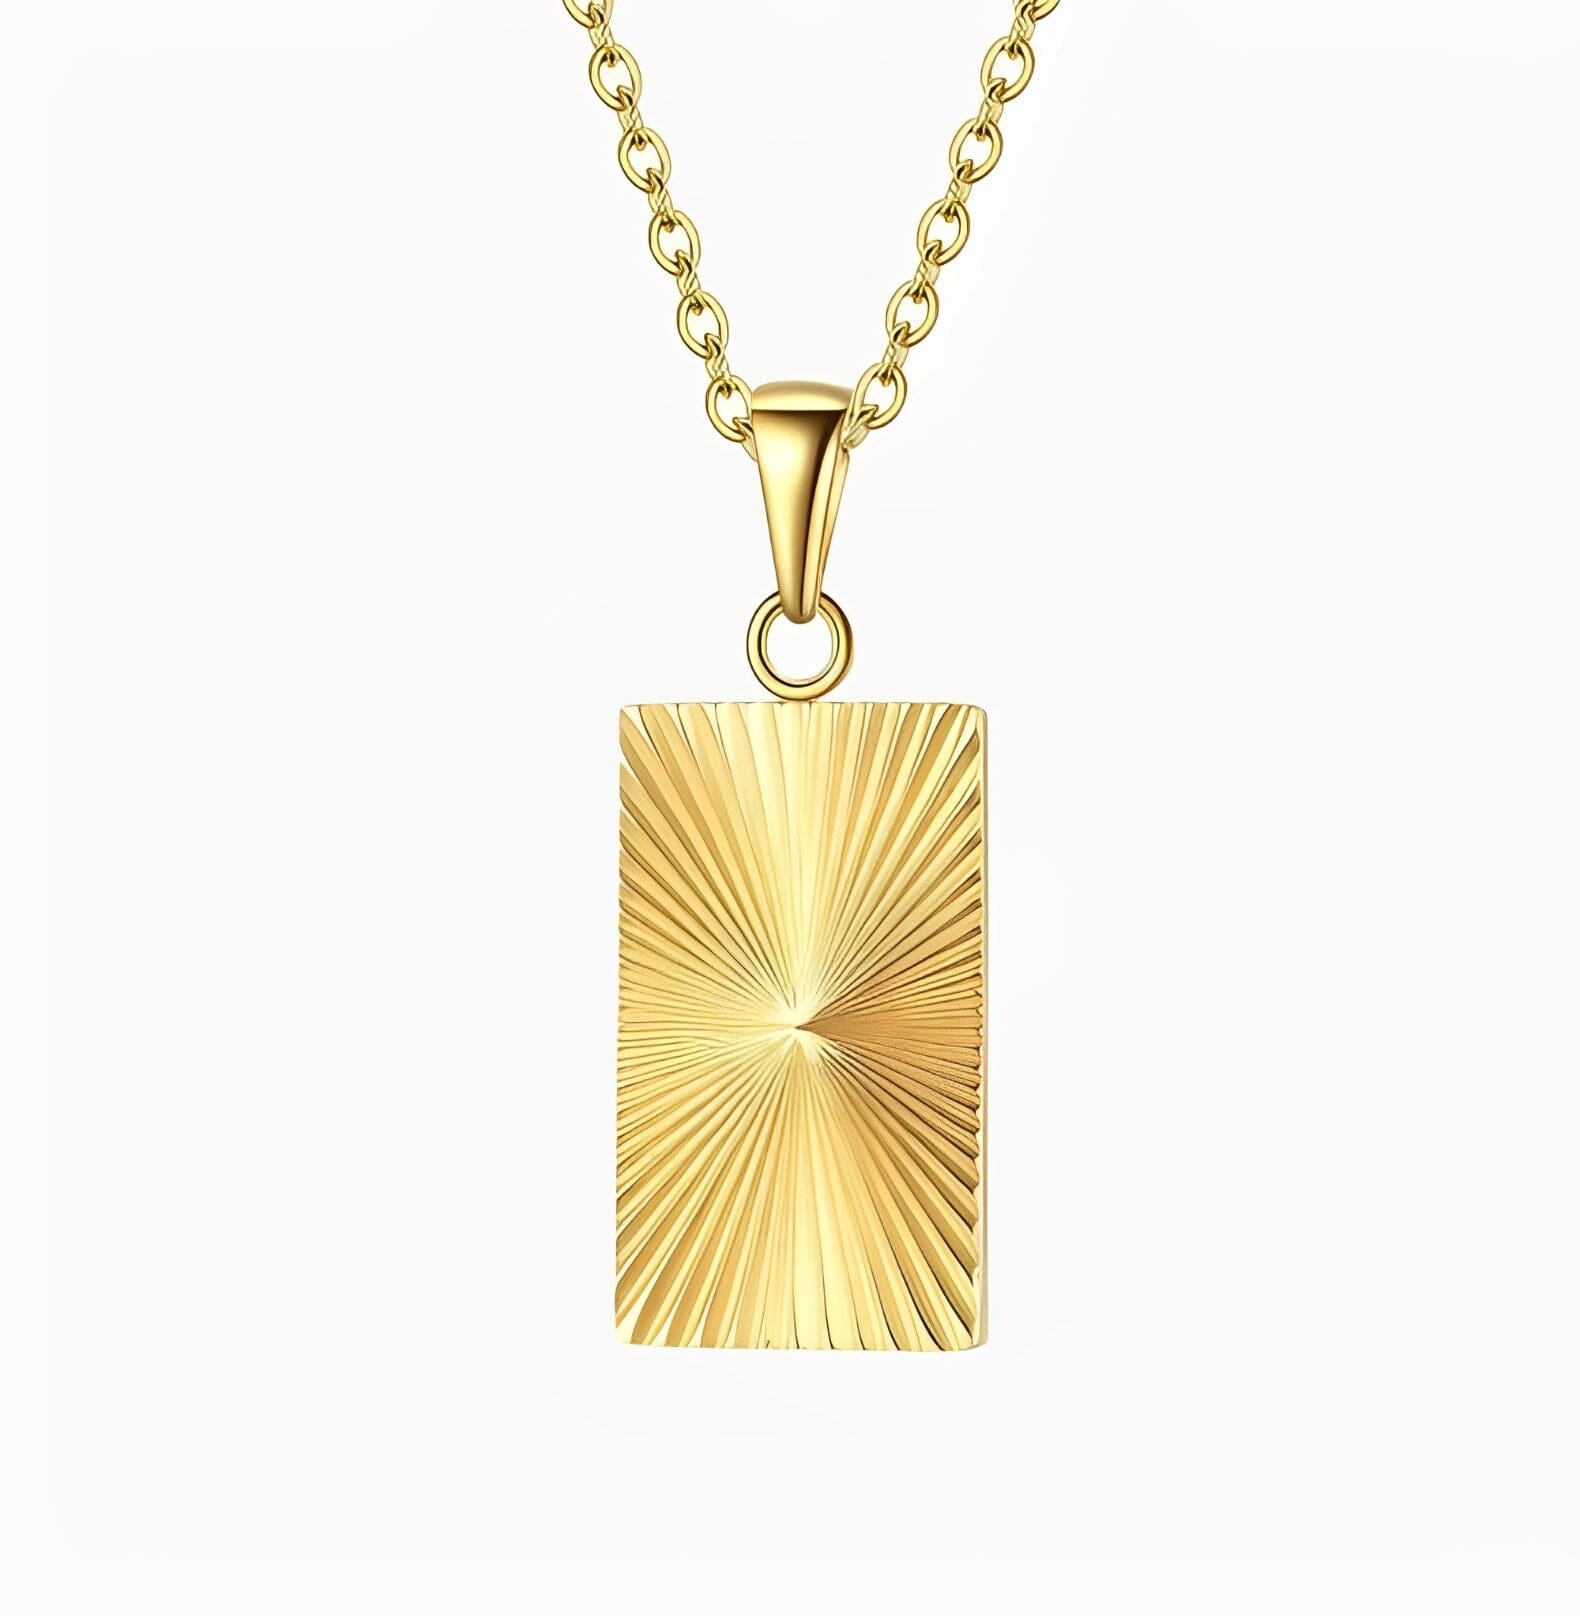 WIND DISC NECKLACE neck Yubama Jewelry Online Store - The Elegant Designs of Gold and Silver ! 